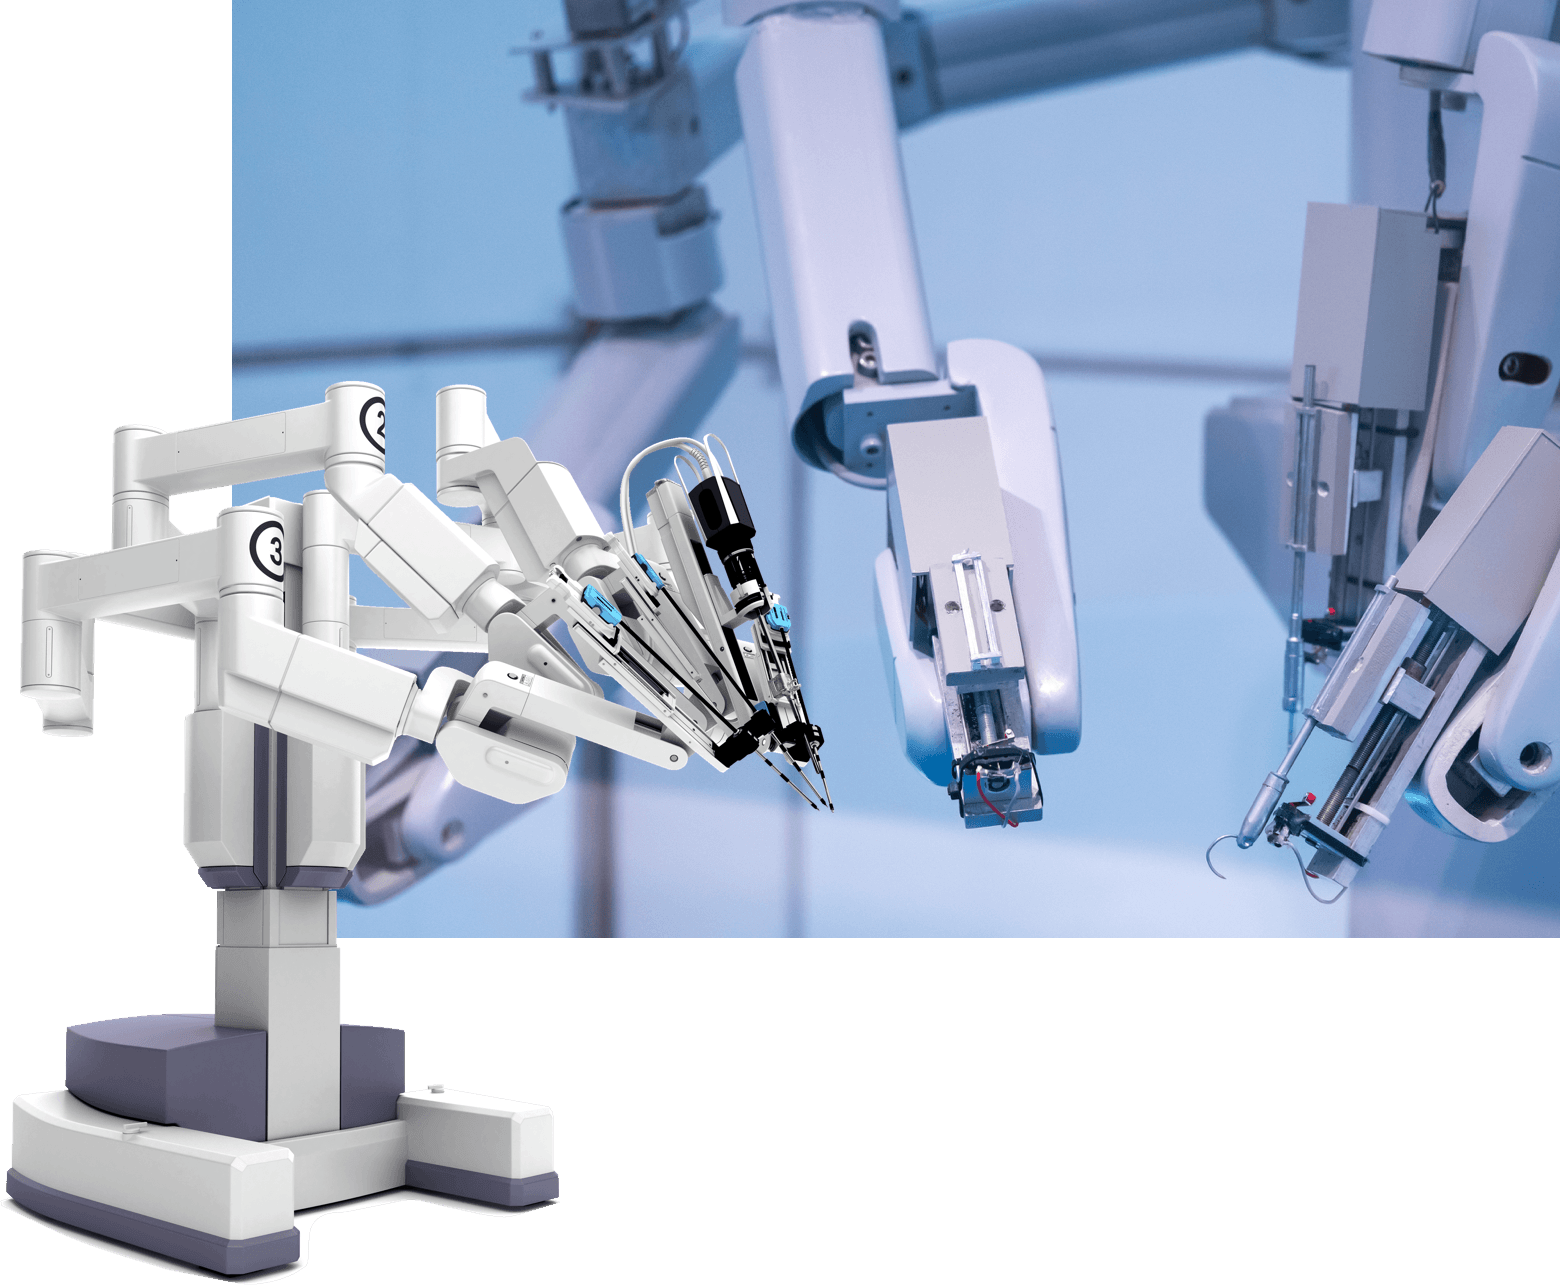 Medical robots signifying the medical manufacturing industry and precision production of medical device components and implants